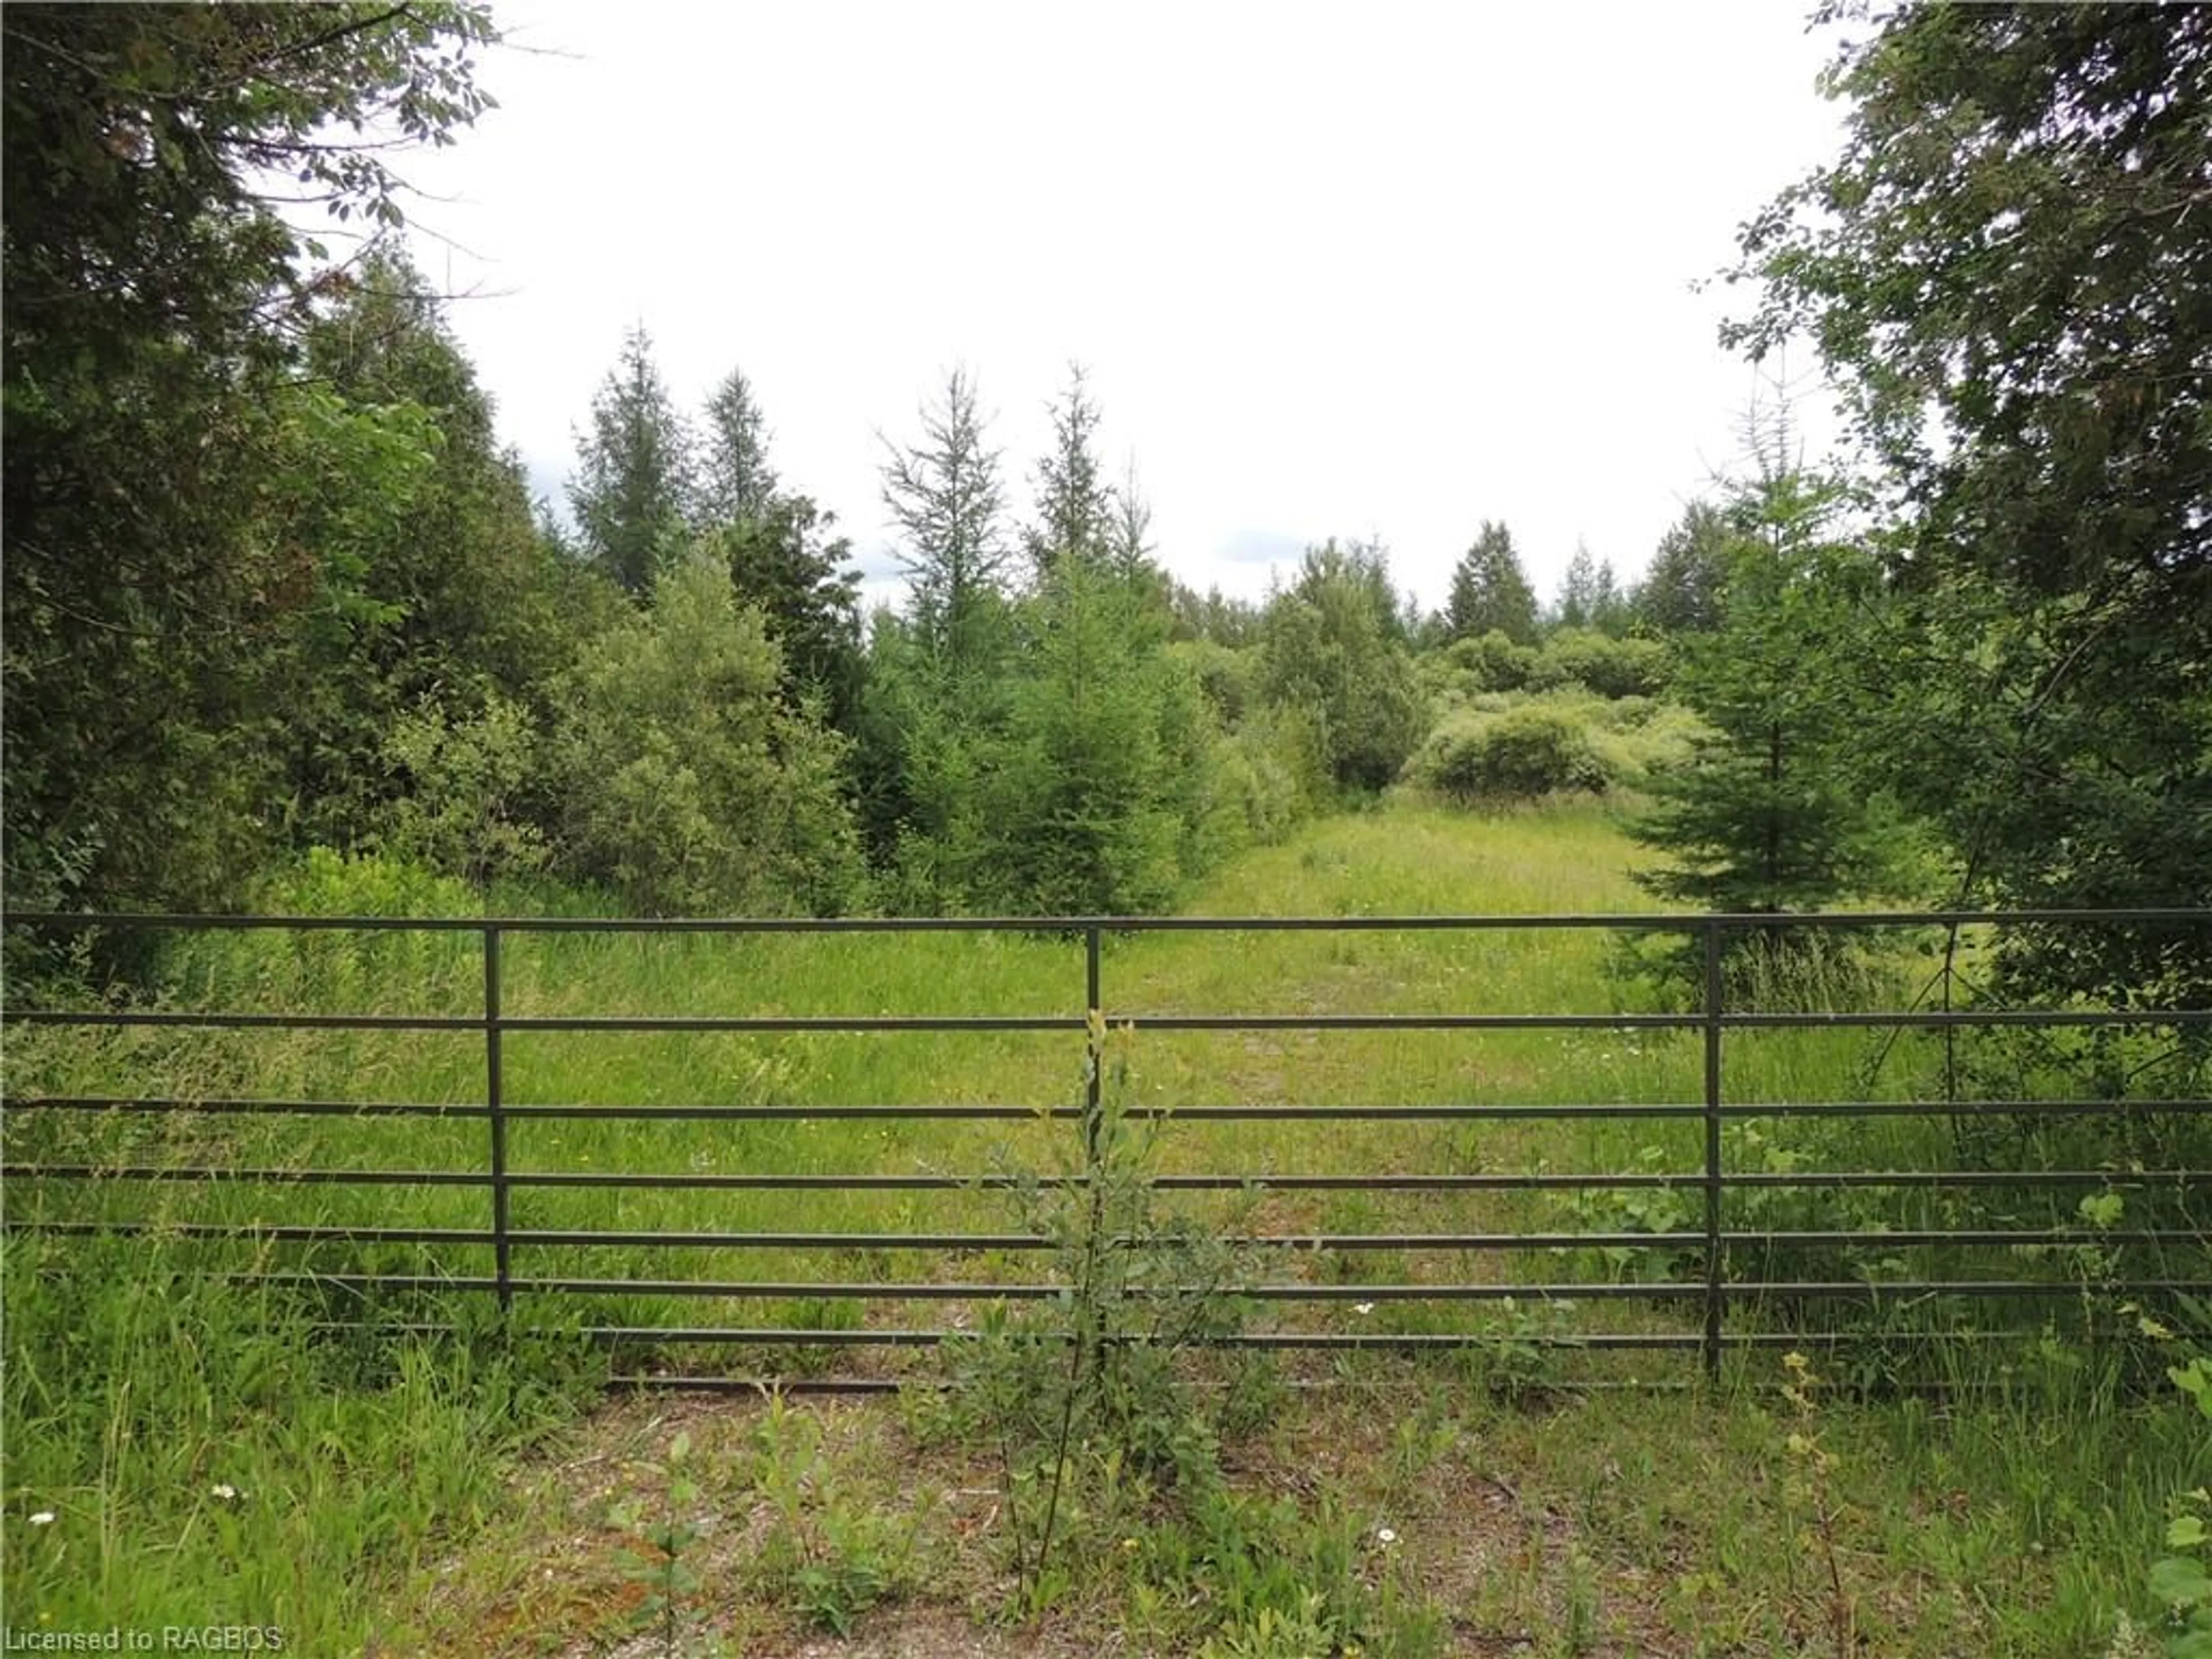 Fenced yard for 620420 Robson Rd, Chatsworth (Twp) Ontario N0H 1R0